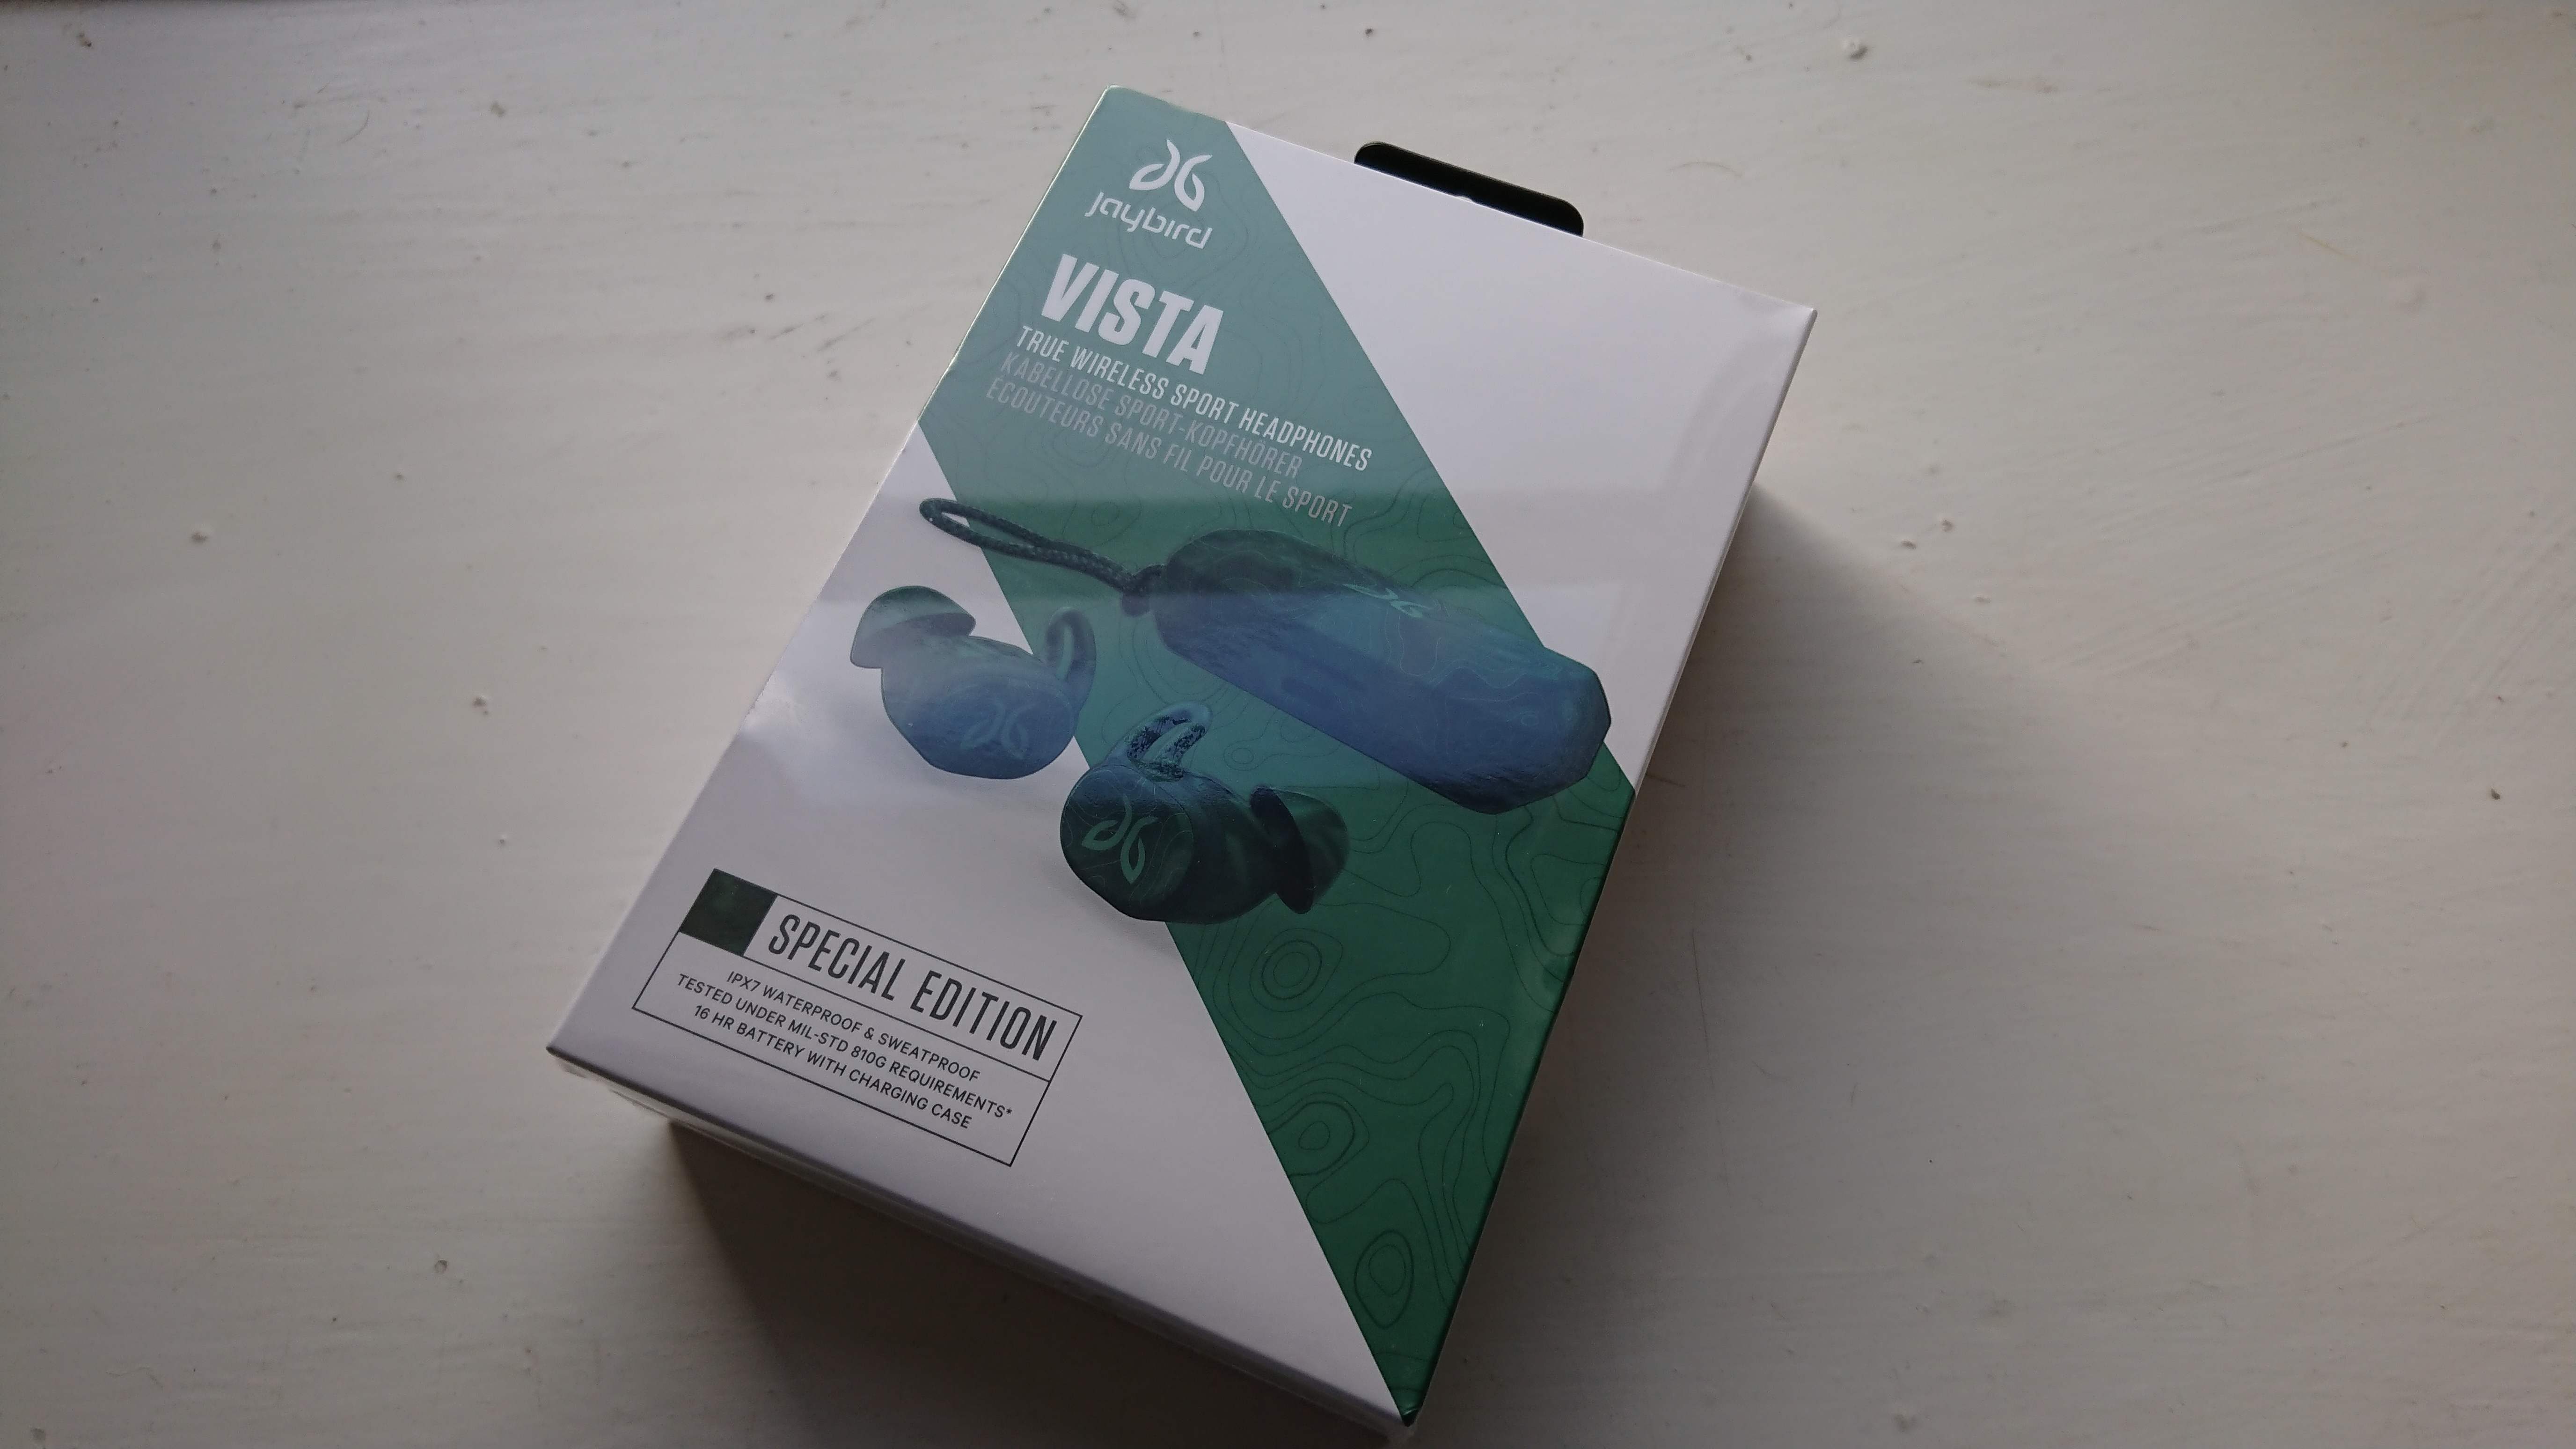 Special Edition Vista earbuds are coloured adventure-green